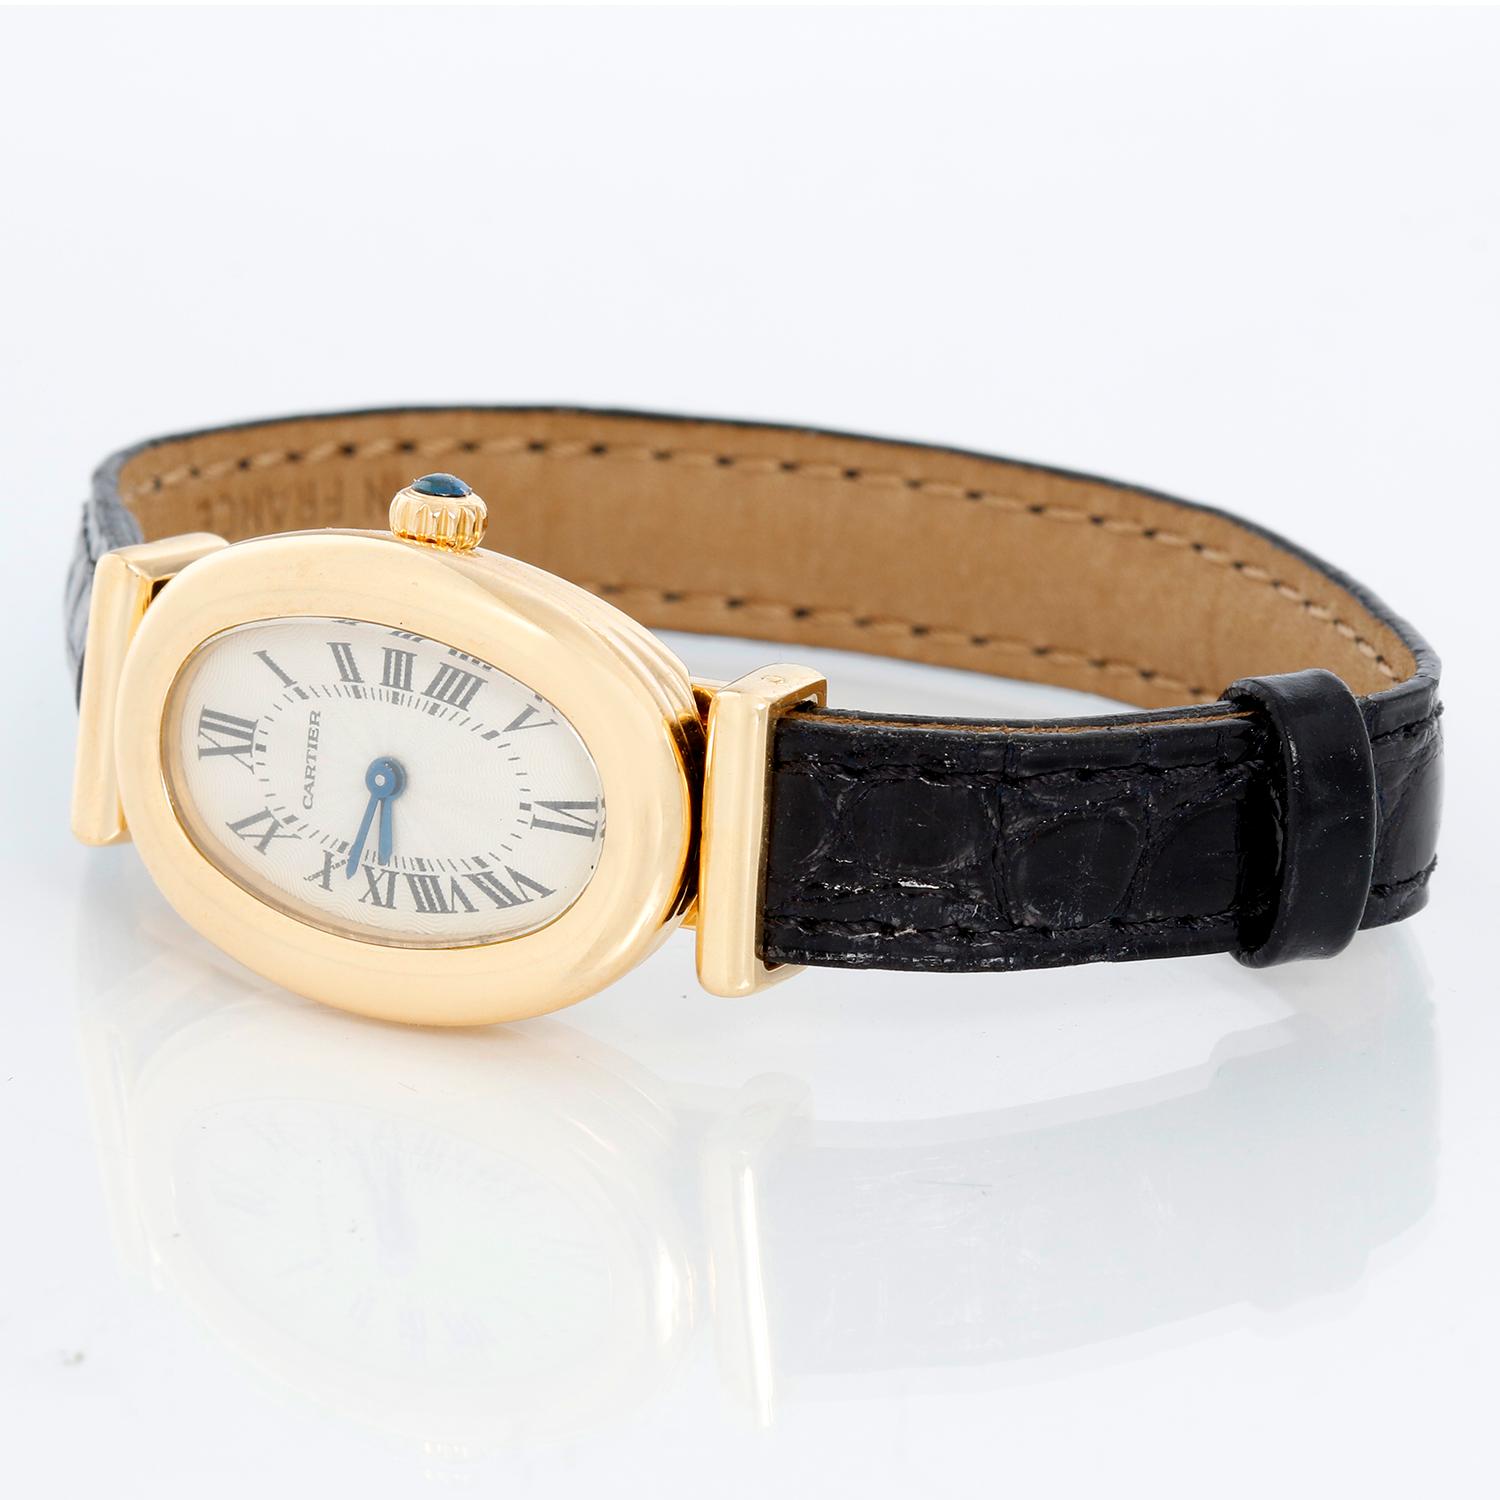 Cartier Baignoire 18K Yellow Gold Watch - Quartz winding. 18K Yellow gold ( 19 mm x 33 mm ). Ivory dial with Roman numerals. Black Cartier strap with 18K yellow deployant buckle. Pre-owned with Cariter box and papers.